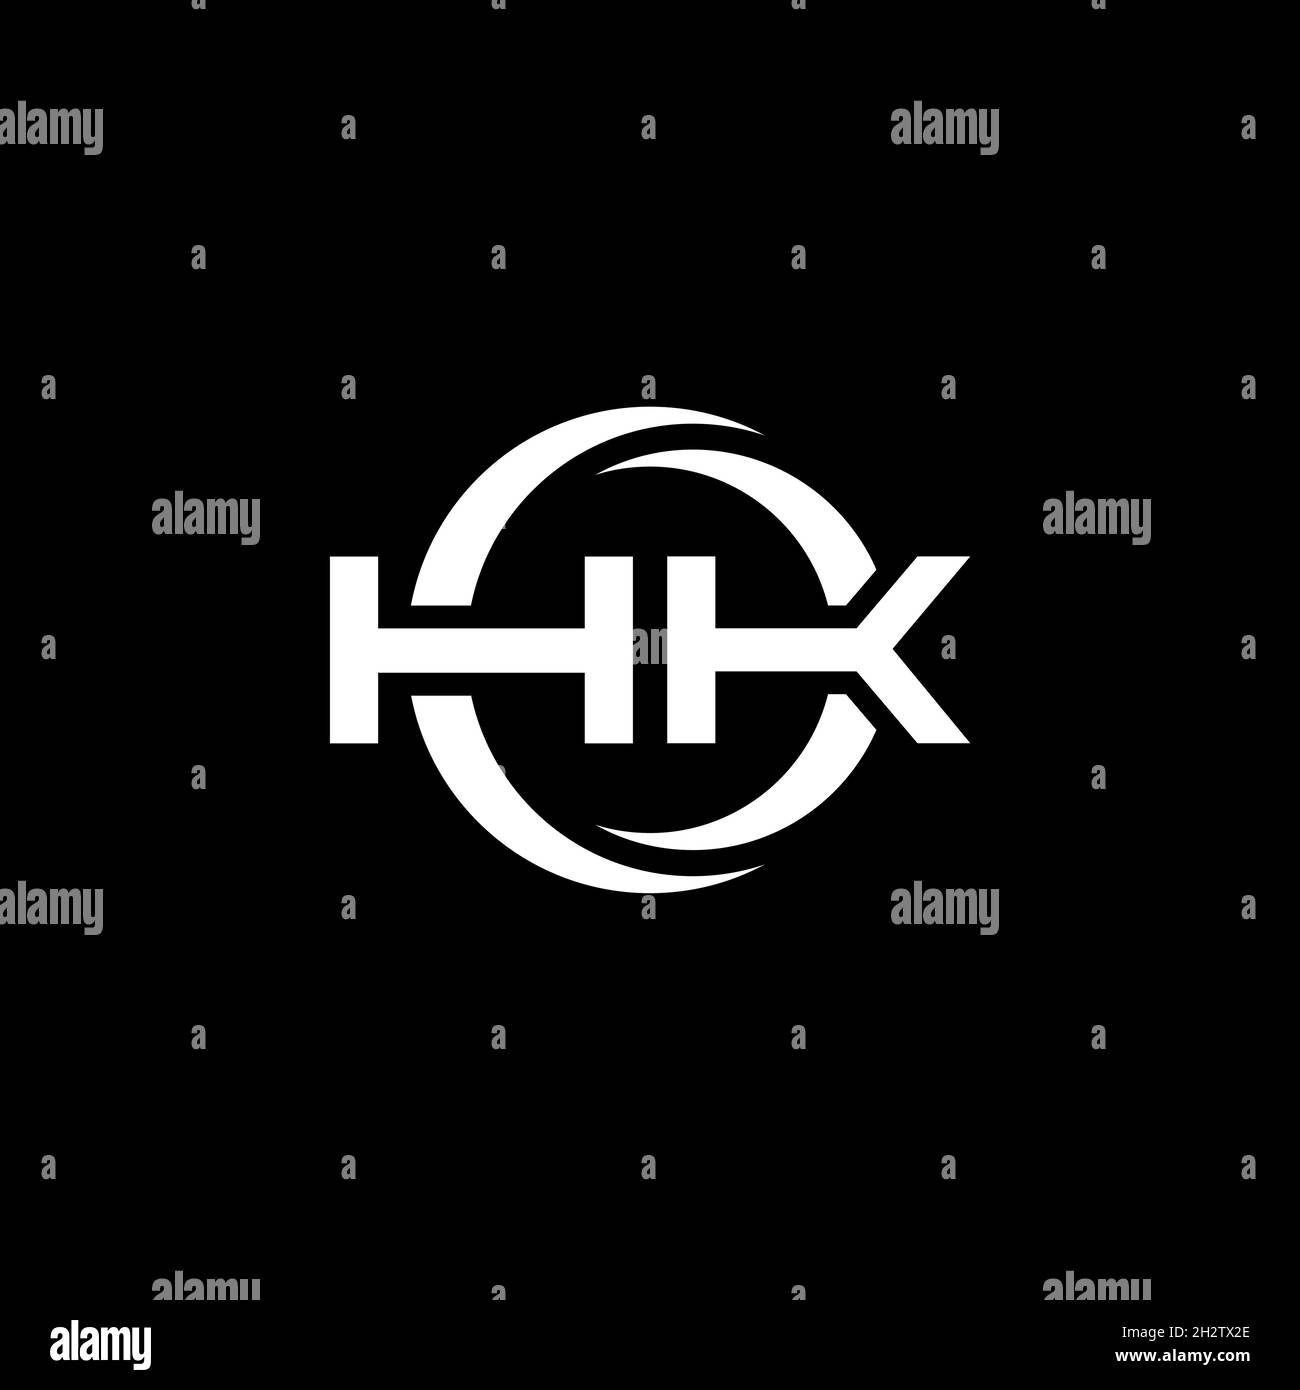 HK Monogram logo letter with simple shape and circle rounded design ...